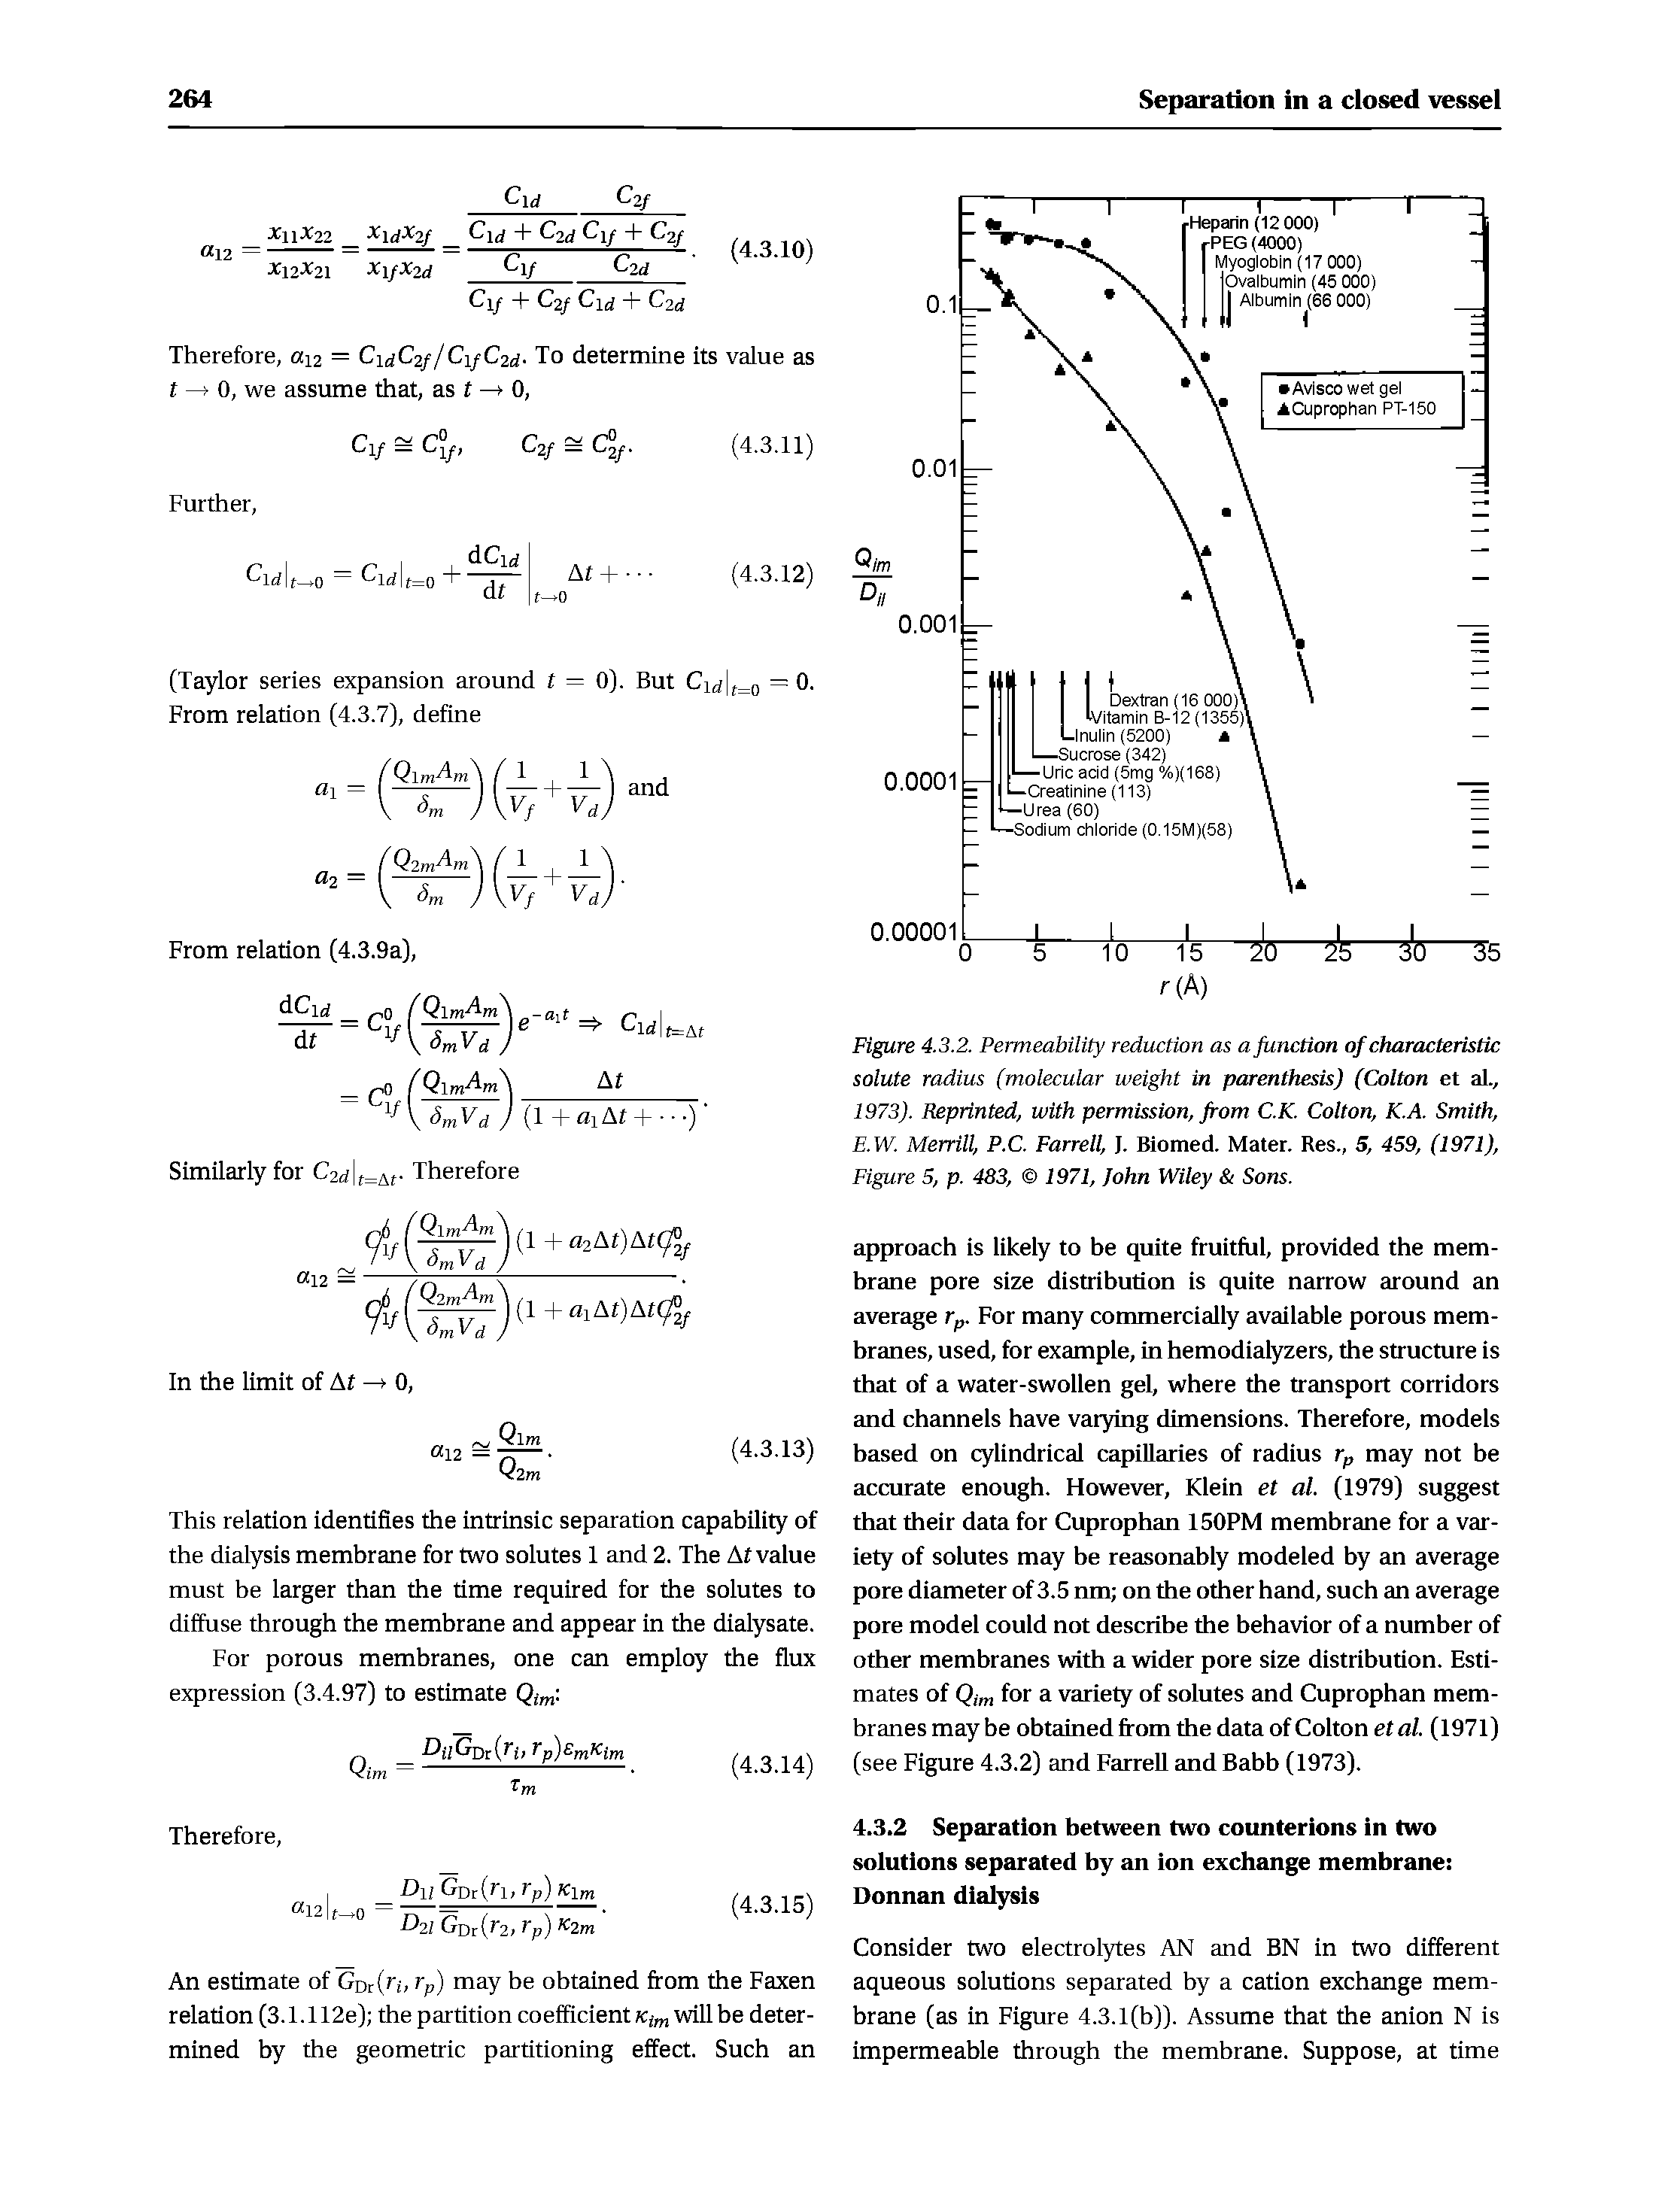 Figure 4.3.2. Permeability reduction as a function of characteristic solute radius (molecular weight in parenthesis) (Colton et al., 1973). Reprinted, with permission, from C.K. Colton, K.A. Smith, E.W. Merrill, P.C. Farrell, J. Biomed. Mater. Res., 5, 459, (1971), Figure 5, p. 483, 1971, John Wiley Sons.